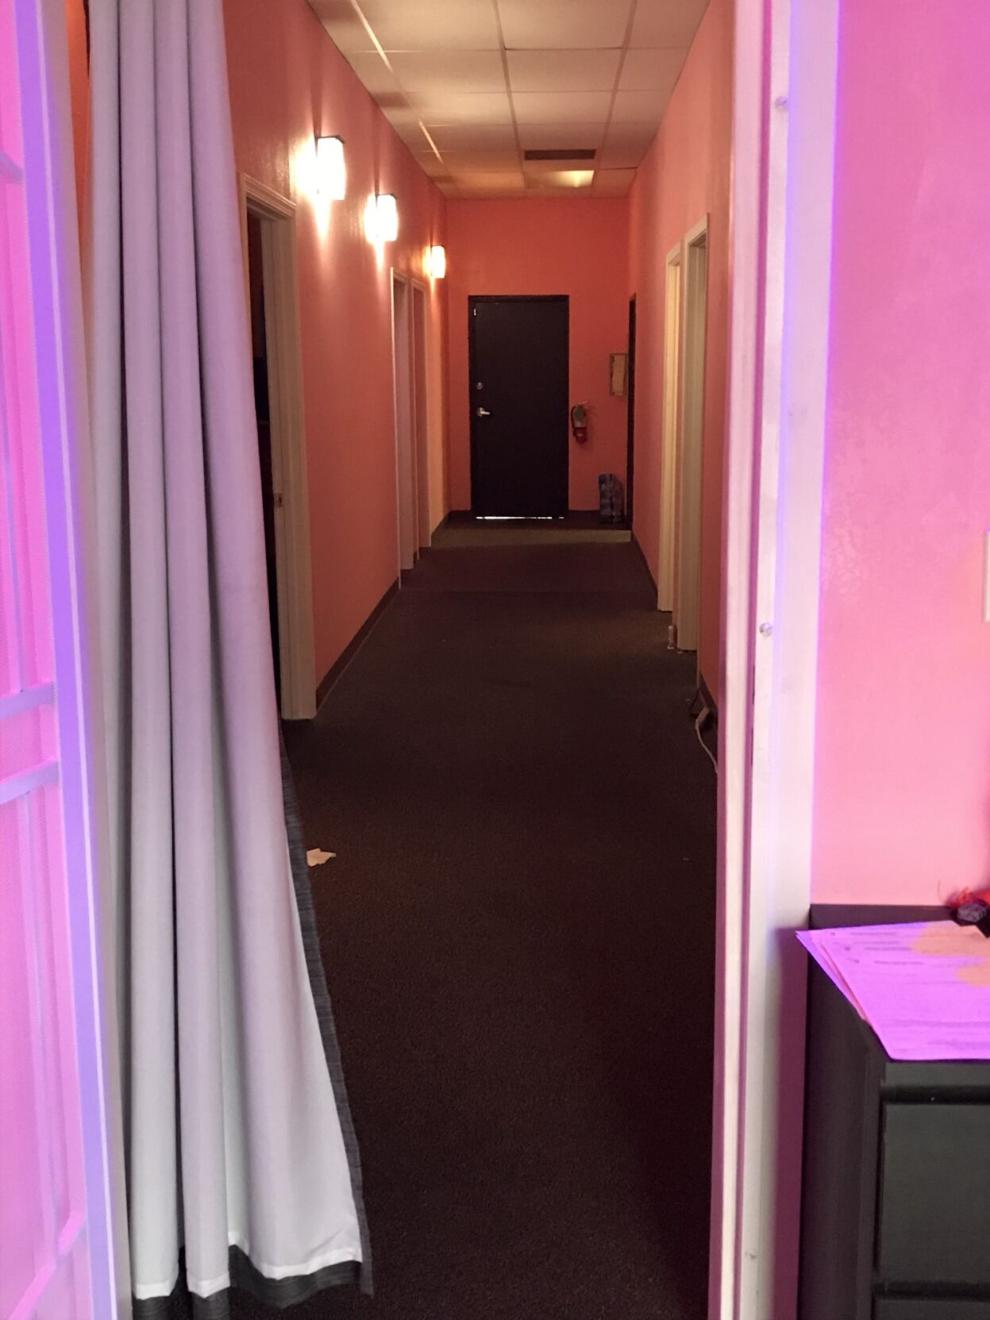 Task Force Raids Medford Massage Parlor In Prostitution And Human 7102